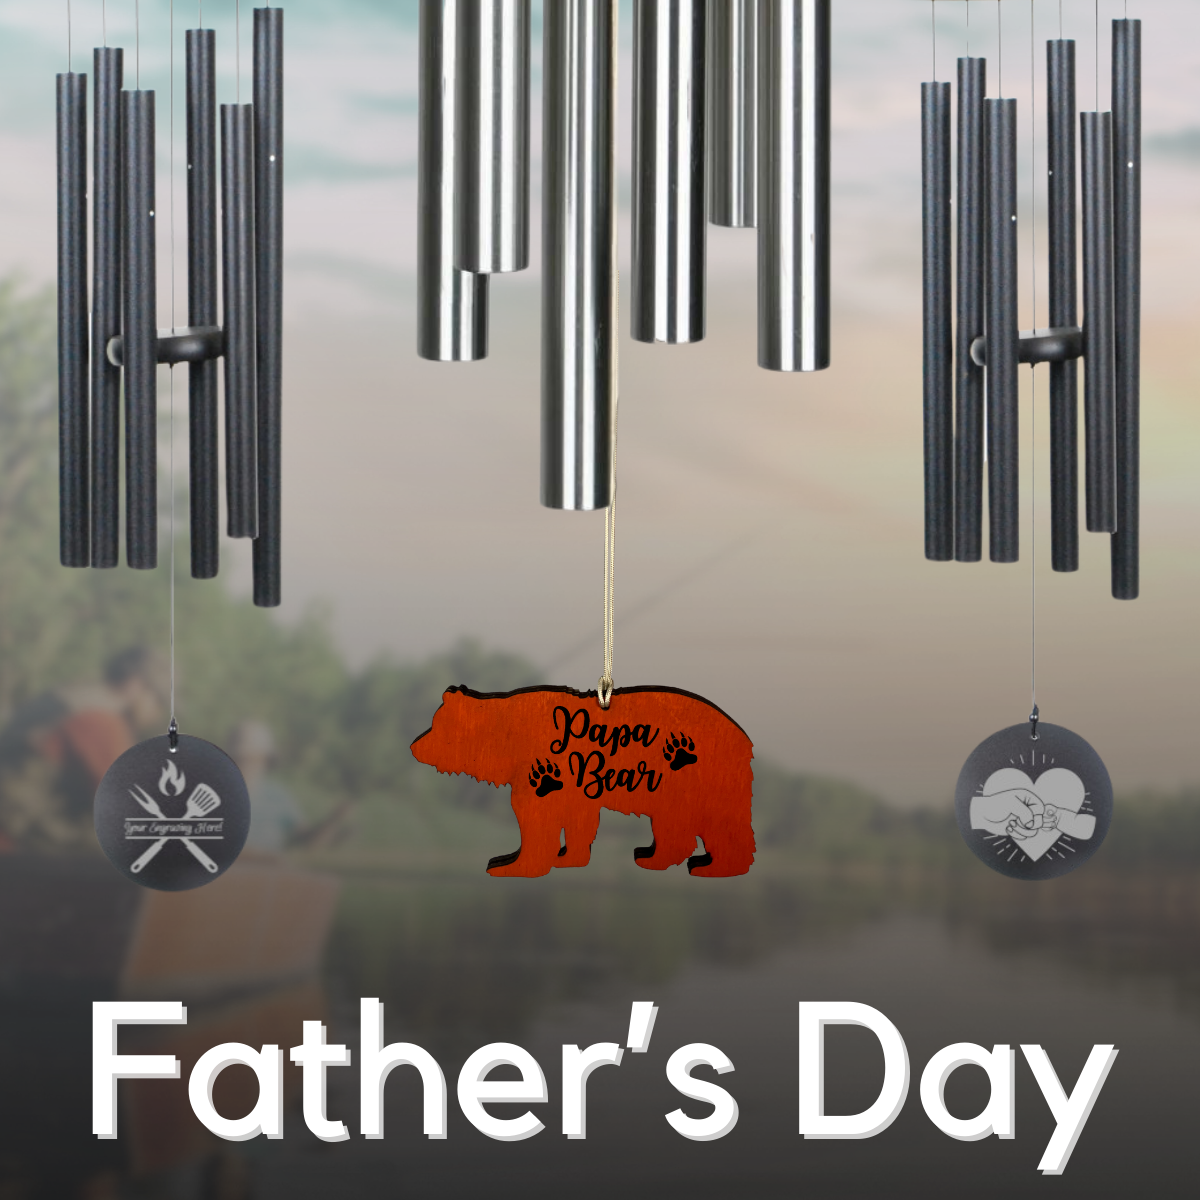 Wind Chimes for Dad: Perfect Father's Day Gifts He'll Love!